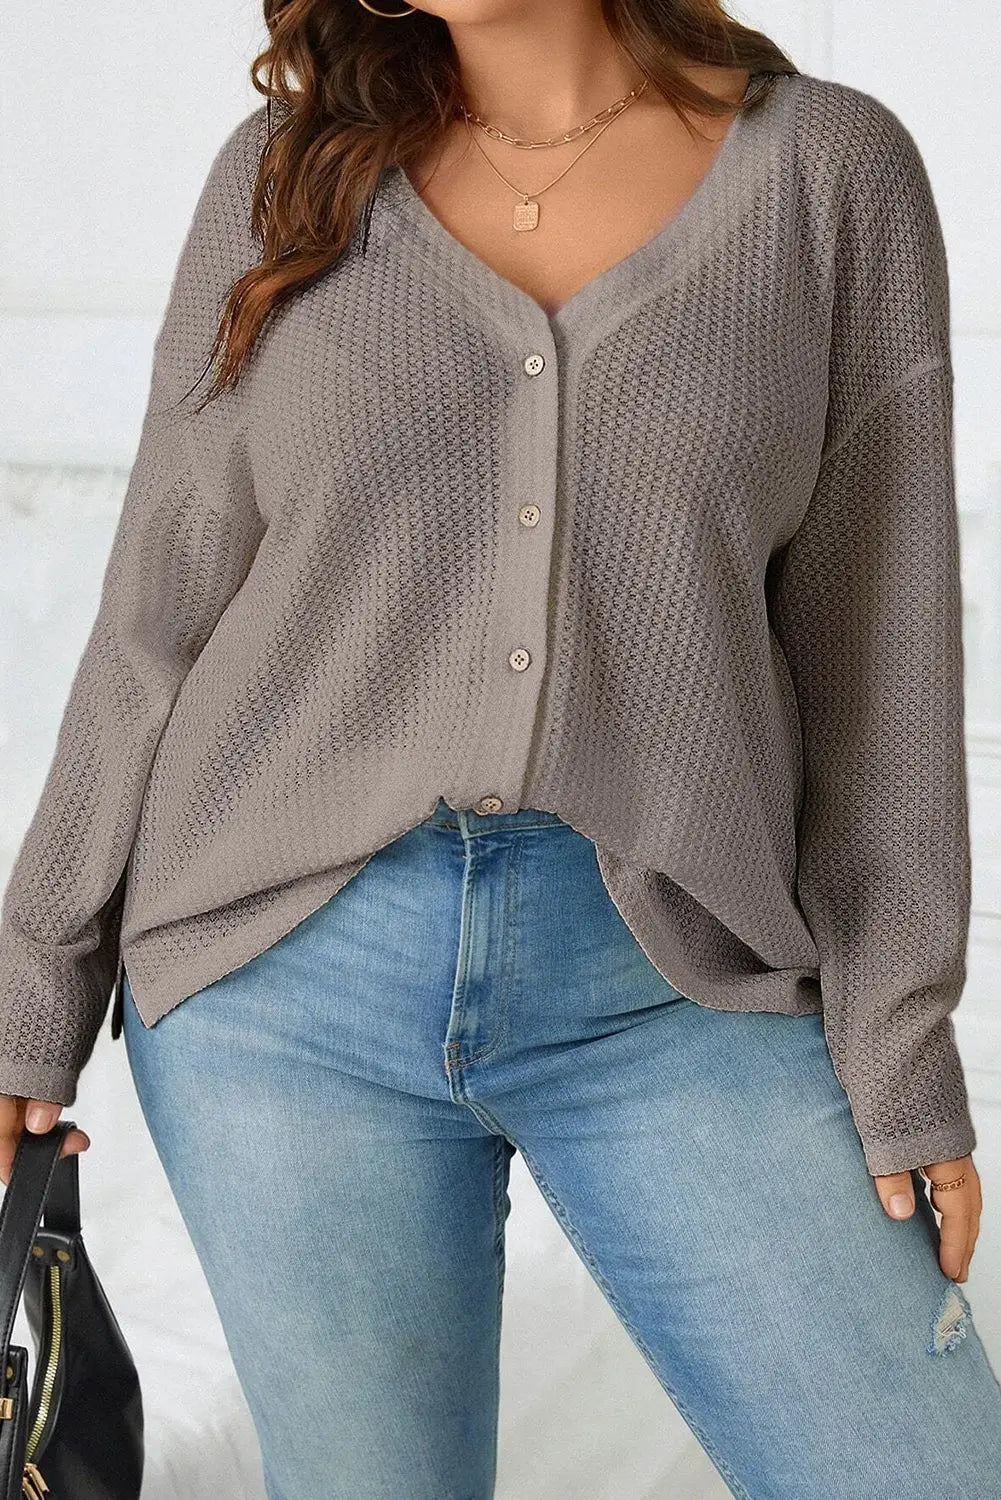 Simply taupe waffle knit drop shoulder button v neck plus size top - 1x / 65% polyester + 30% viscose + 5% elastane